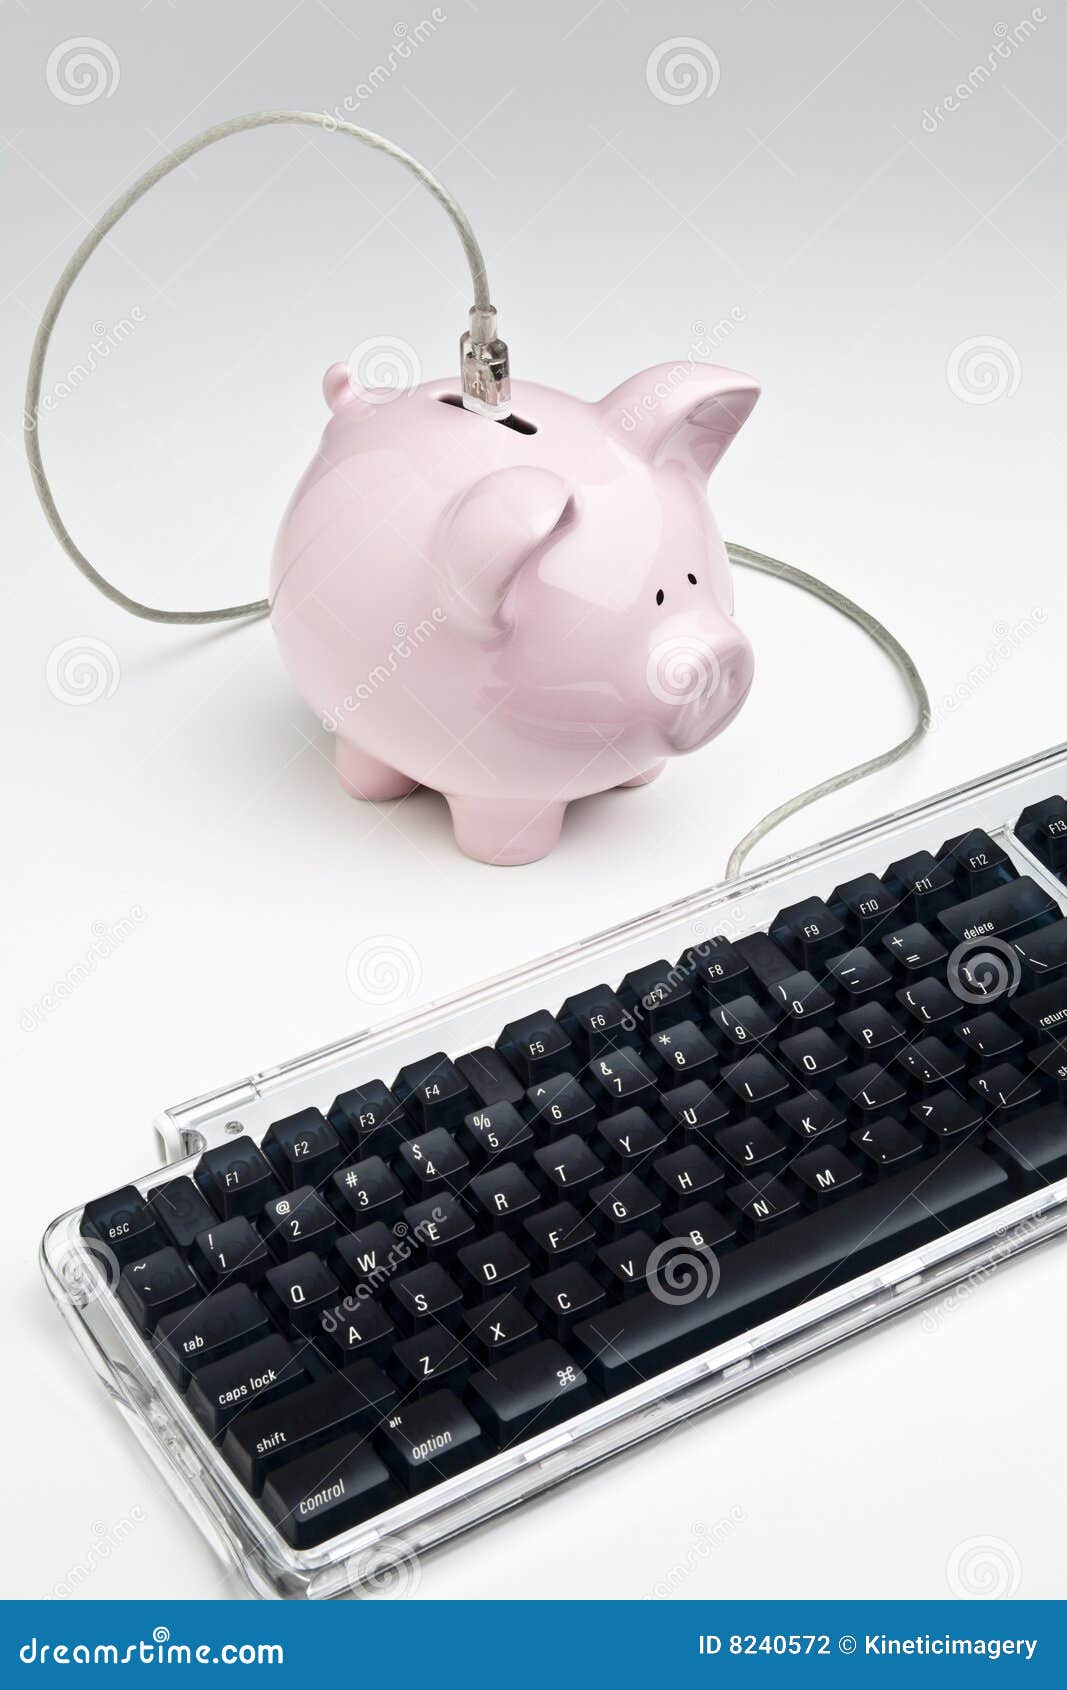 Online banking. Computer keyboard connected to a piggy bank